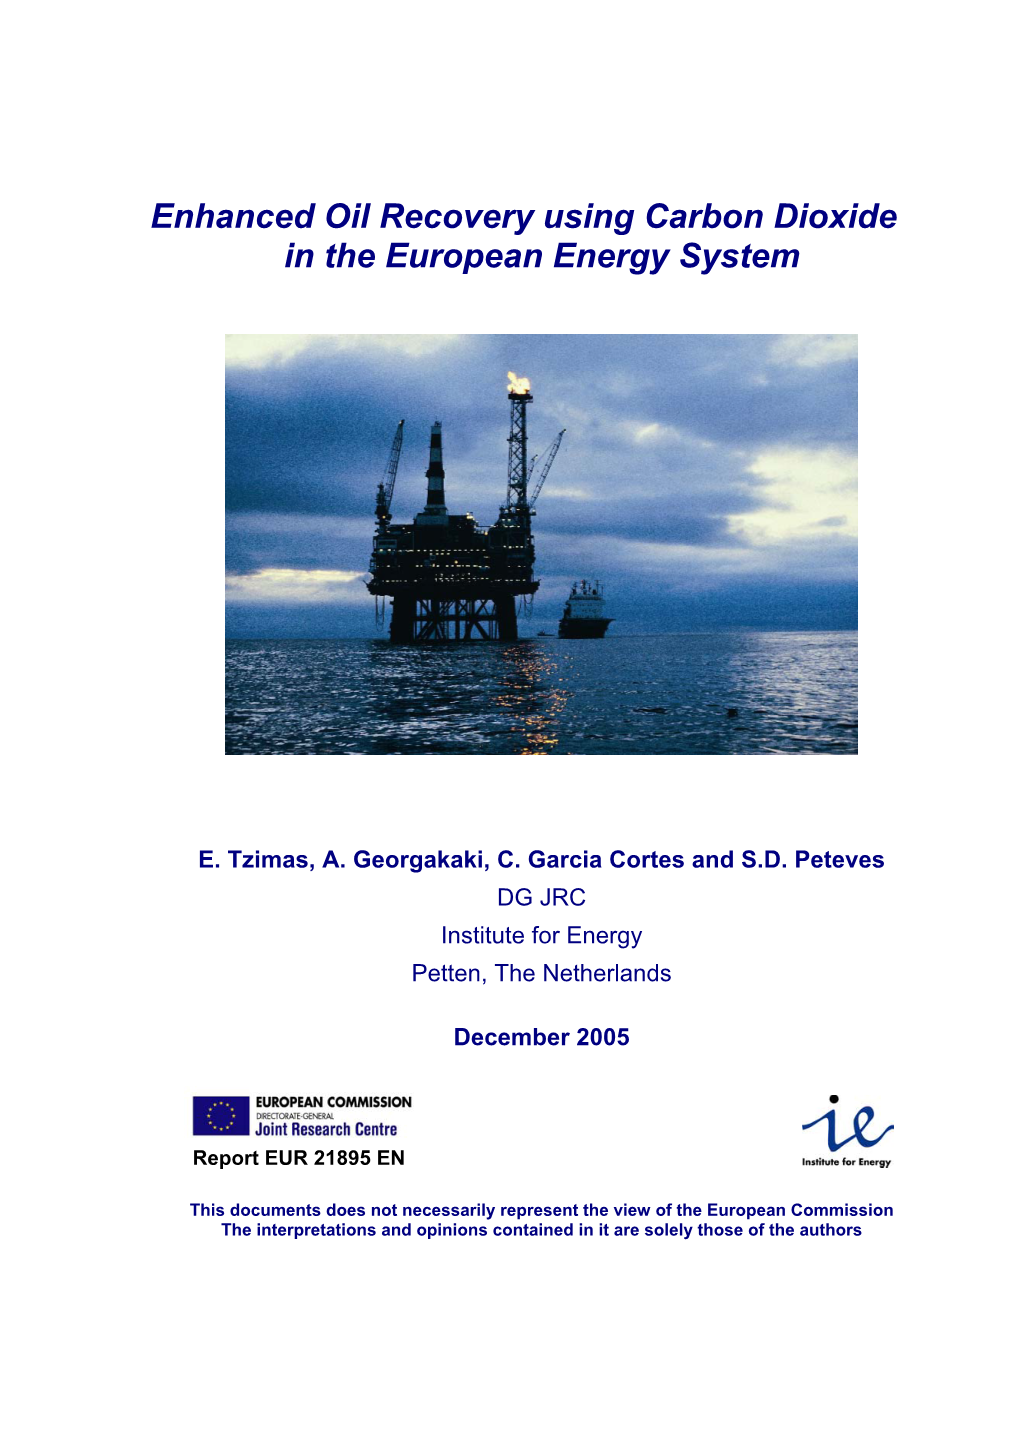 enhanced-oil-recovery-using-carbon-dioxide-in-the-european-energy